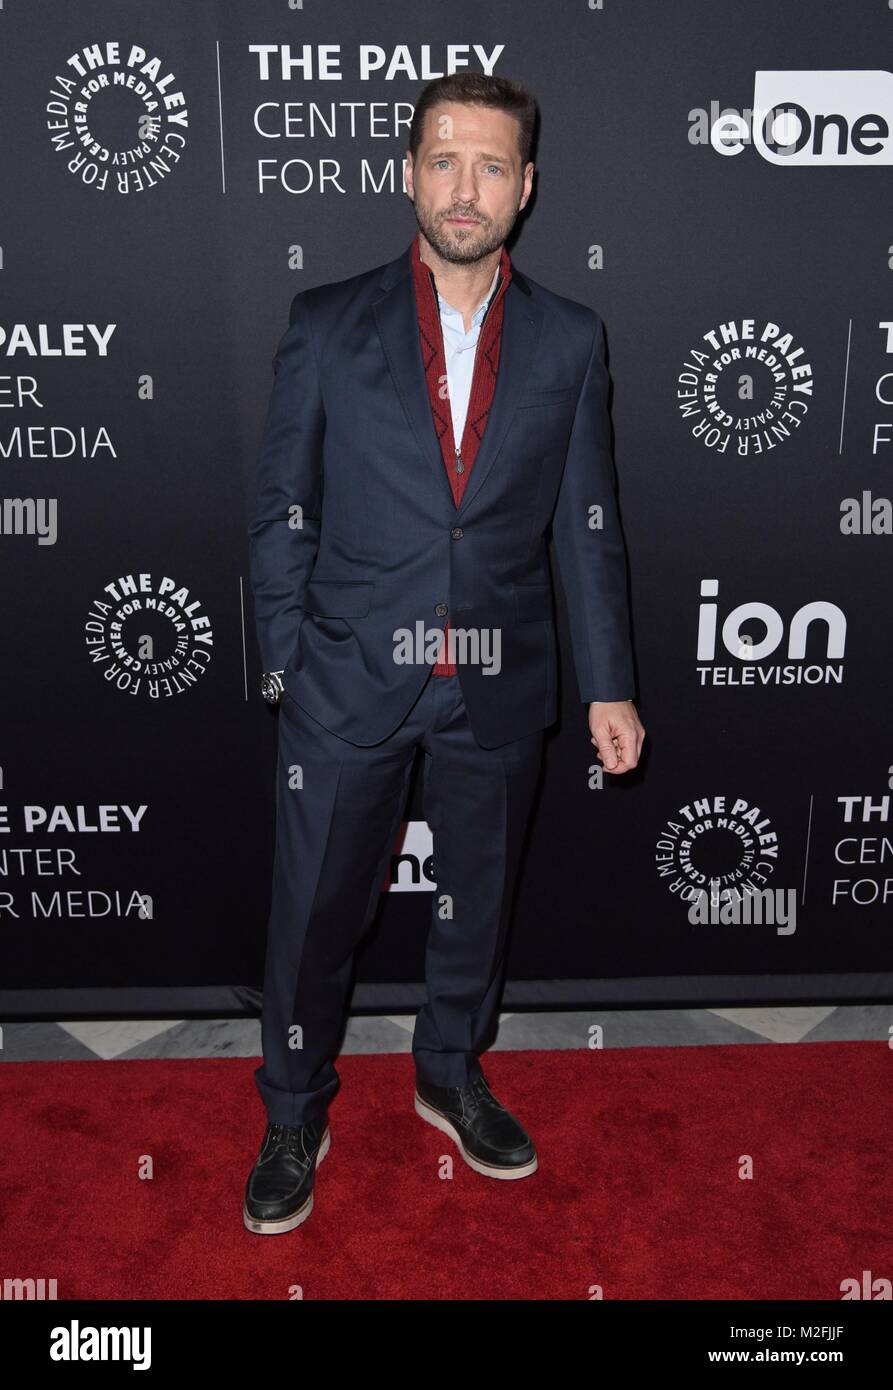 New York, NY, USA. 7th Feb, 2018. Jason Priestley at arrivals for ION Television's PRIVATE EYES Preview Screening and Discussion, The Paley Center for Media, New York, NY February 7, 2018. Credit: Derek Storm/Everett Collection/Alamy Live News Stock Photo